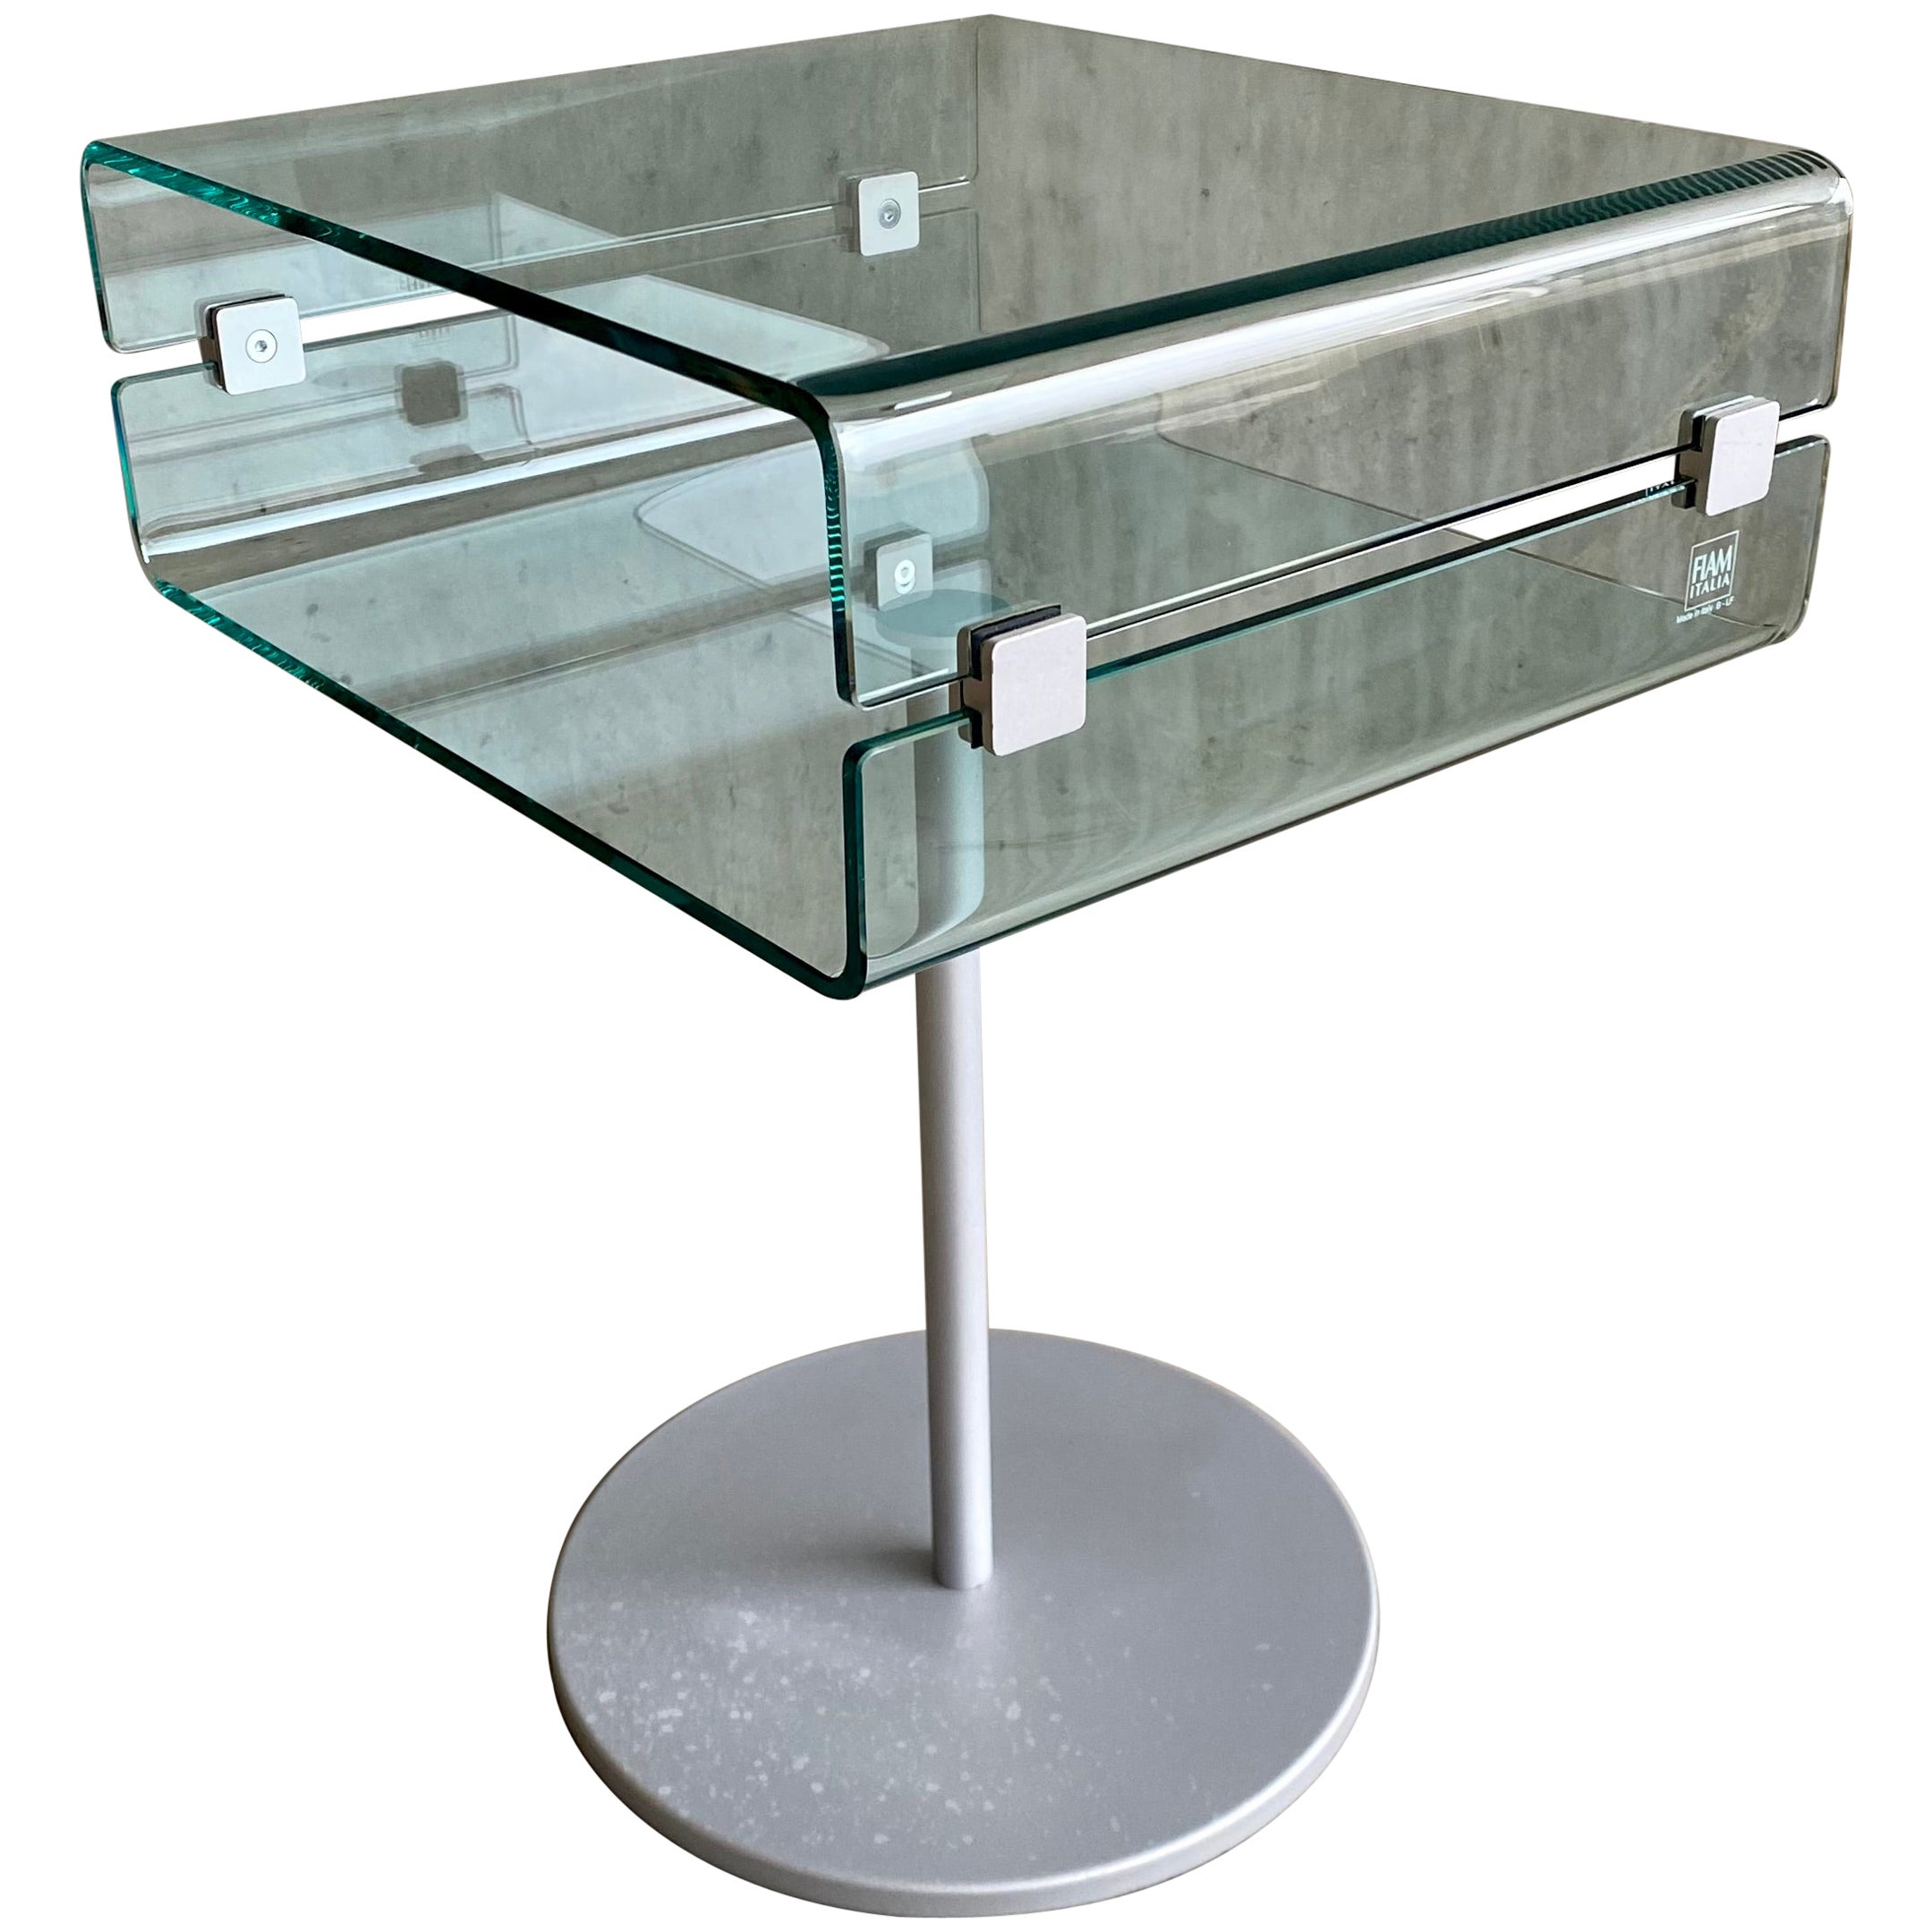 C&C Night Table or Side Table by Christophe Pillet for Fiam Italia